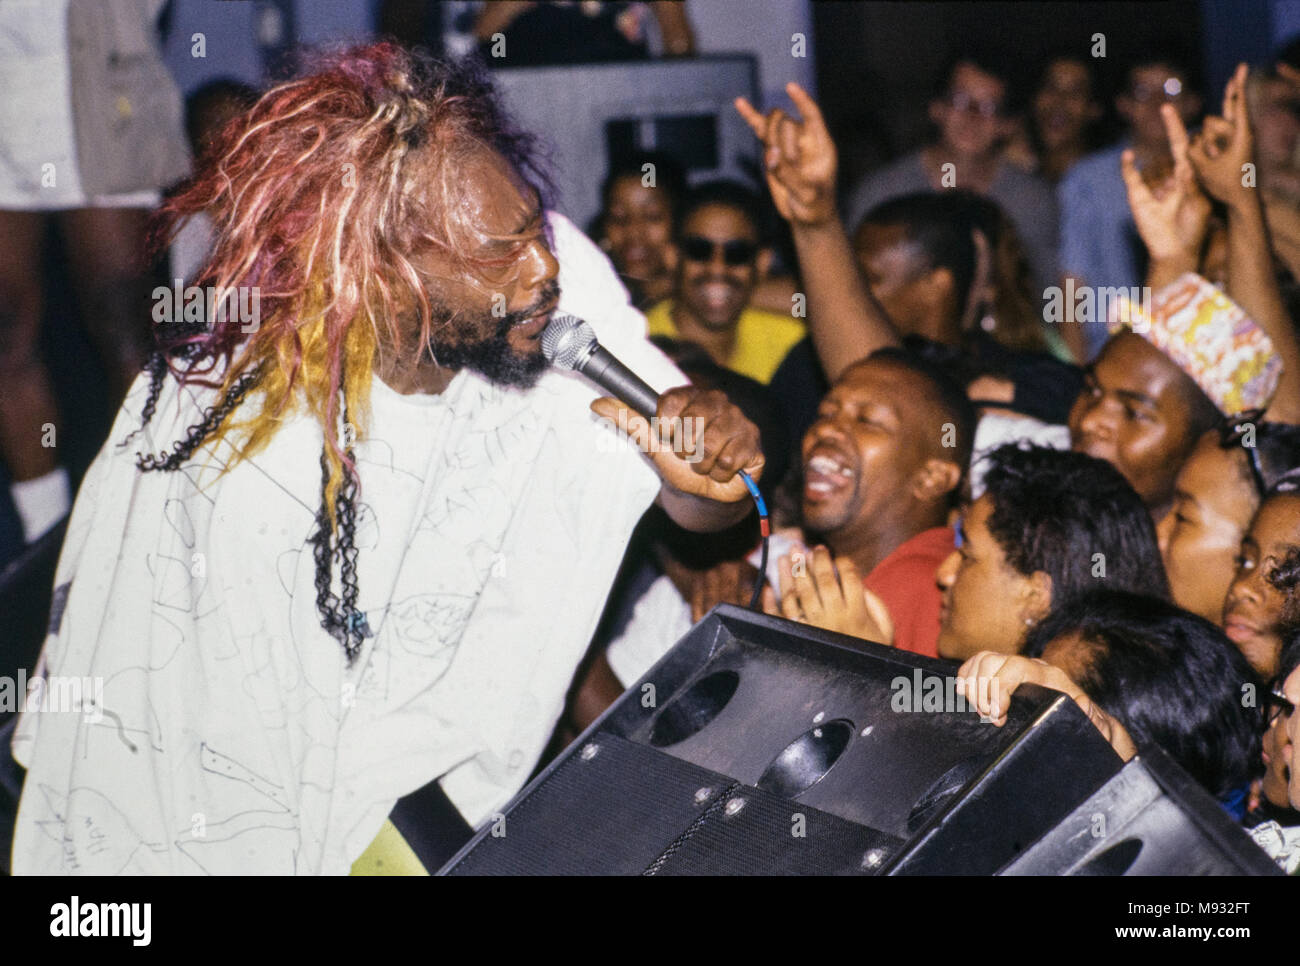 George Clinton in concert at the Palladium, NYC, June, 25 1991 Stock Photo